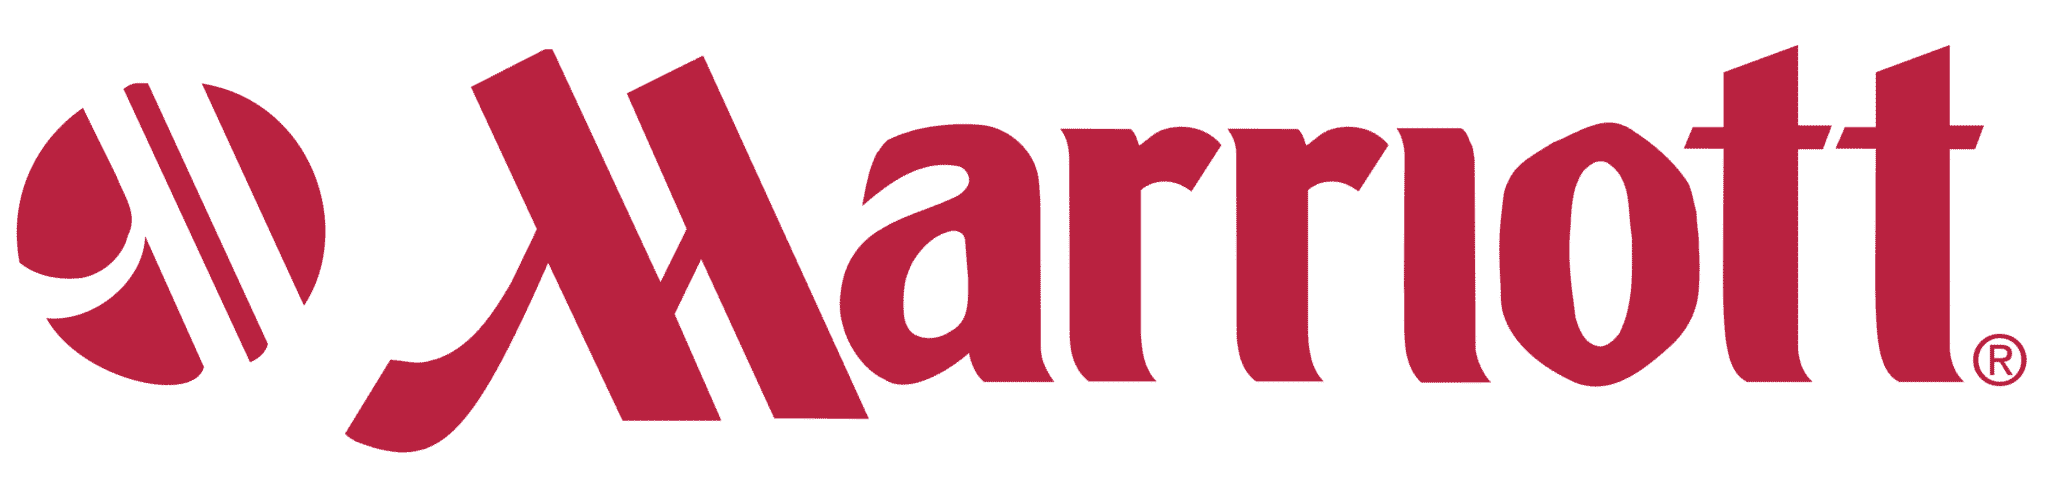 The image shows the Marriott logo in bold red letters against a green background with the iconic 'M' and registered trademark symbol.